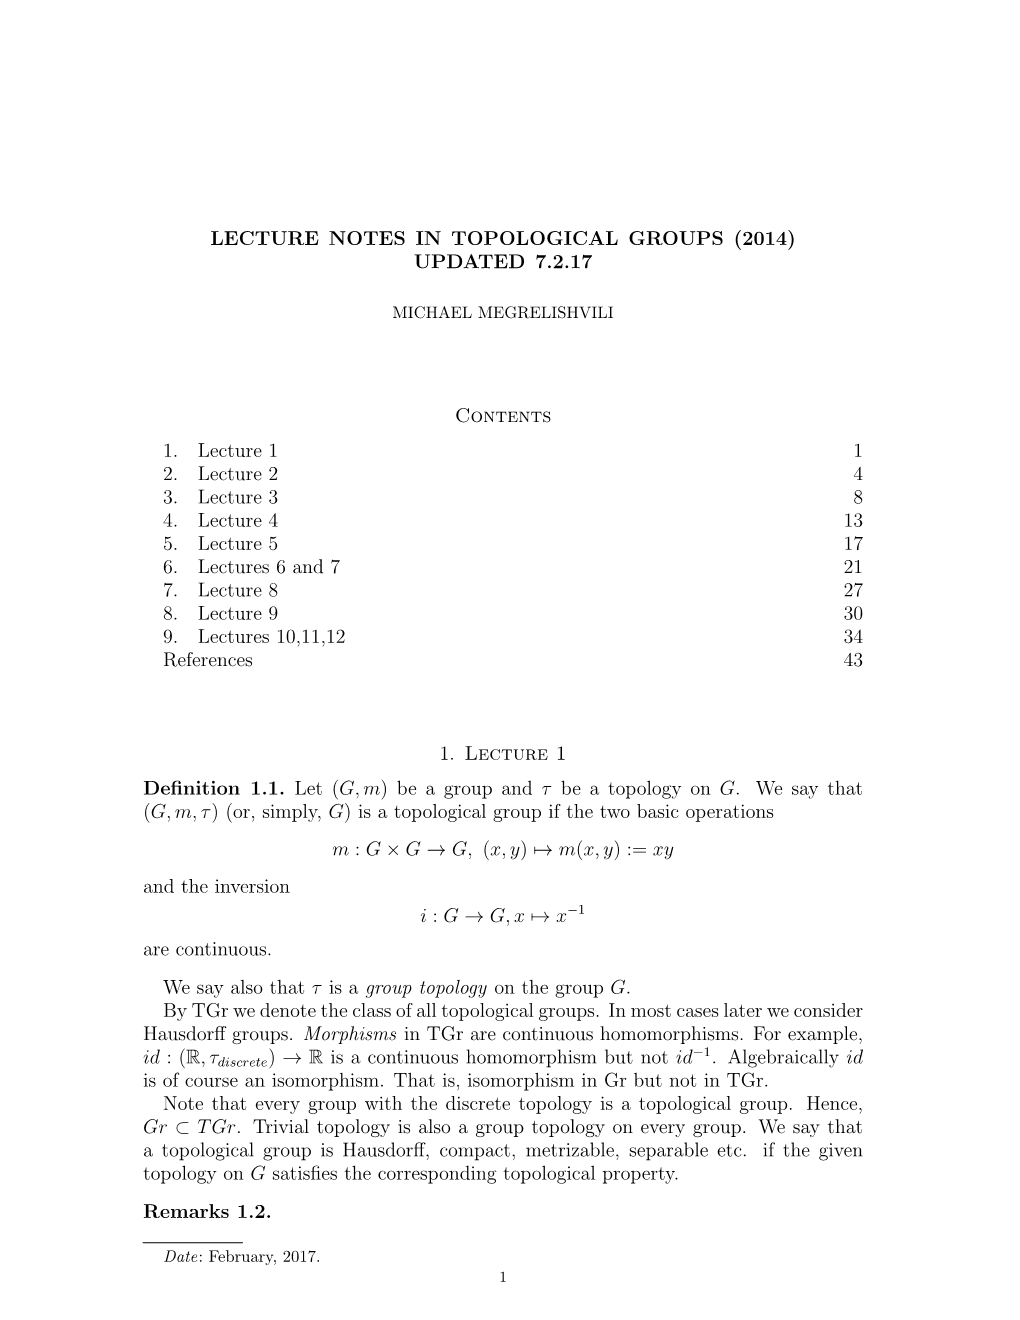 Lecture Notes in Topological Groups (2014) Updated 7.2.17